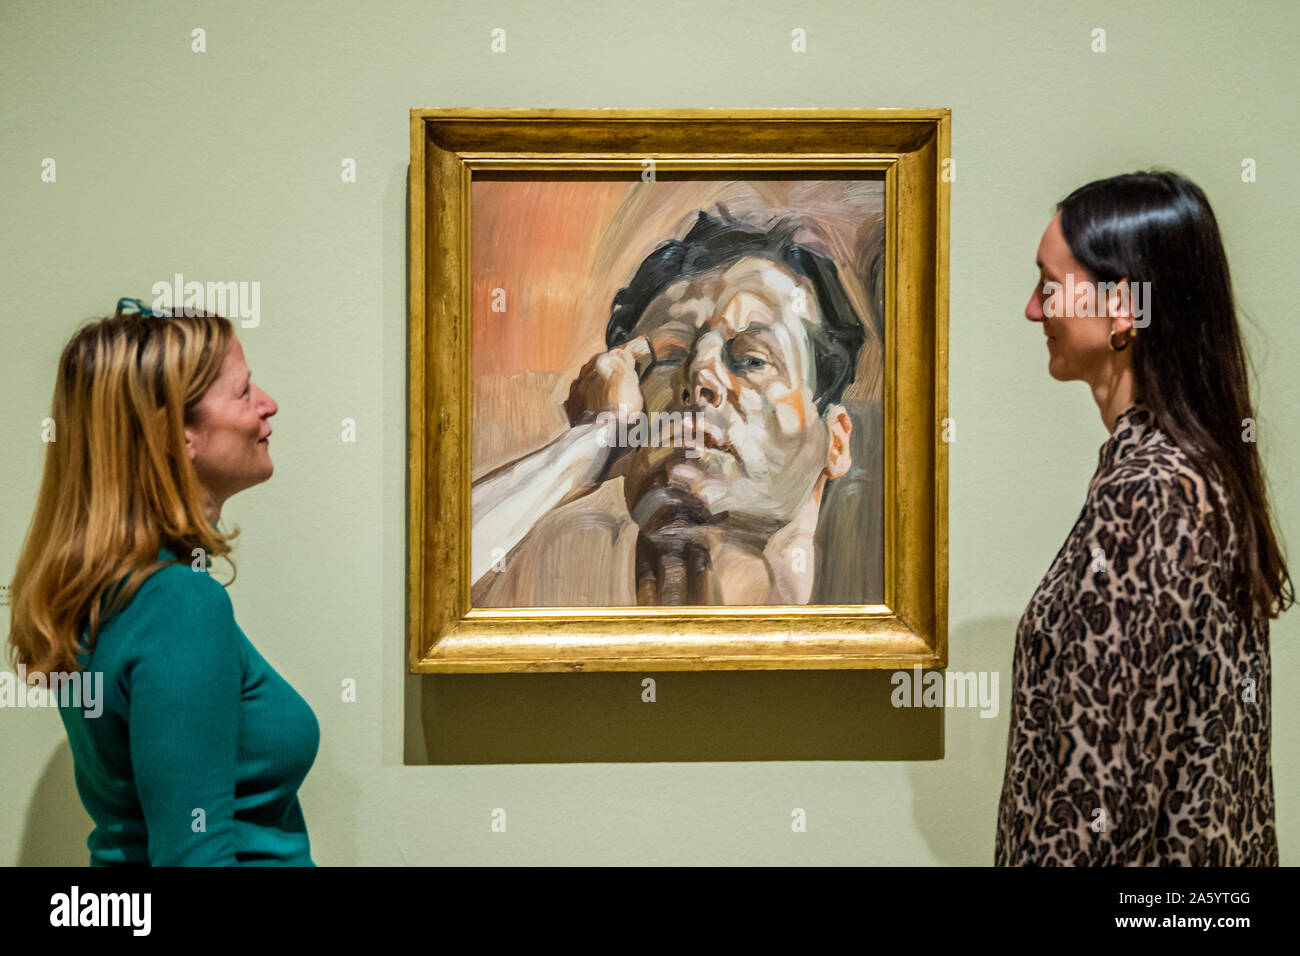 Lucian Freud Portrait High Resolution Stock Photography and Images - Alamy